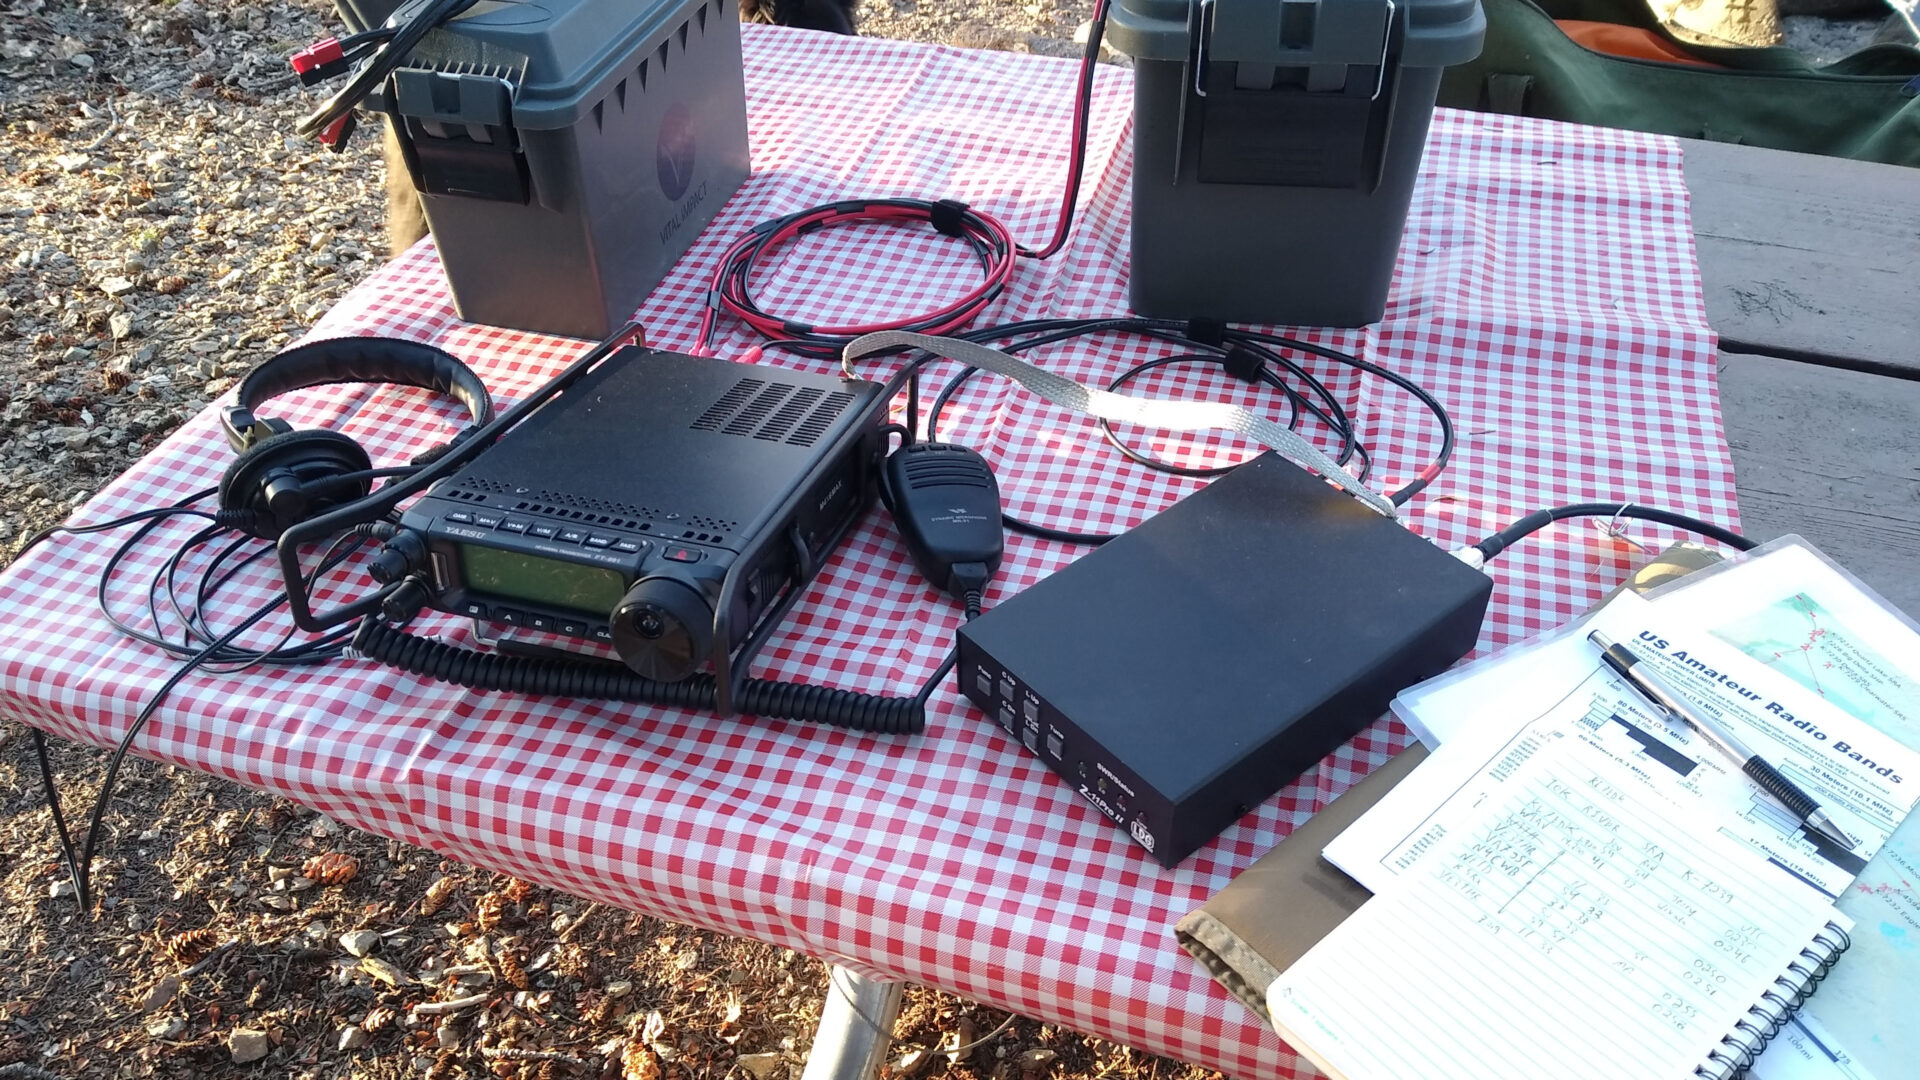 A basic HF portable/field operating station consisting of the radio, power supply, and tuner.